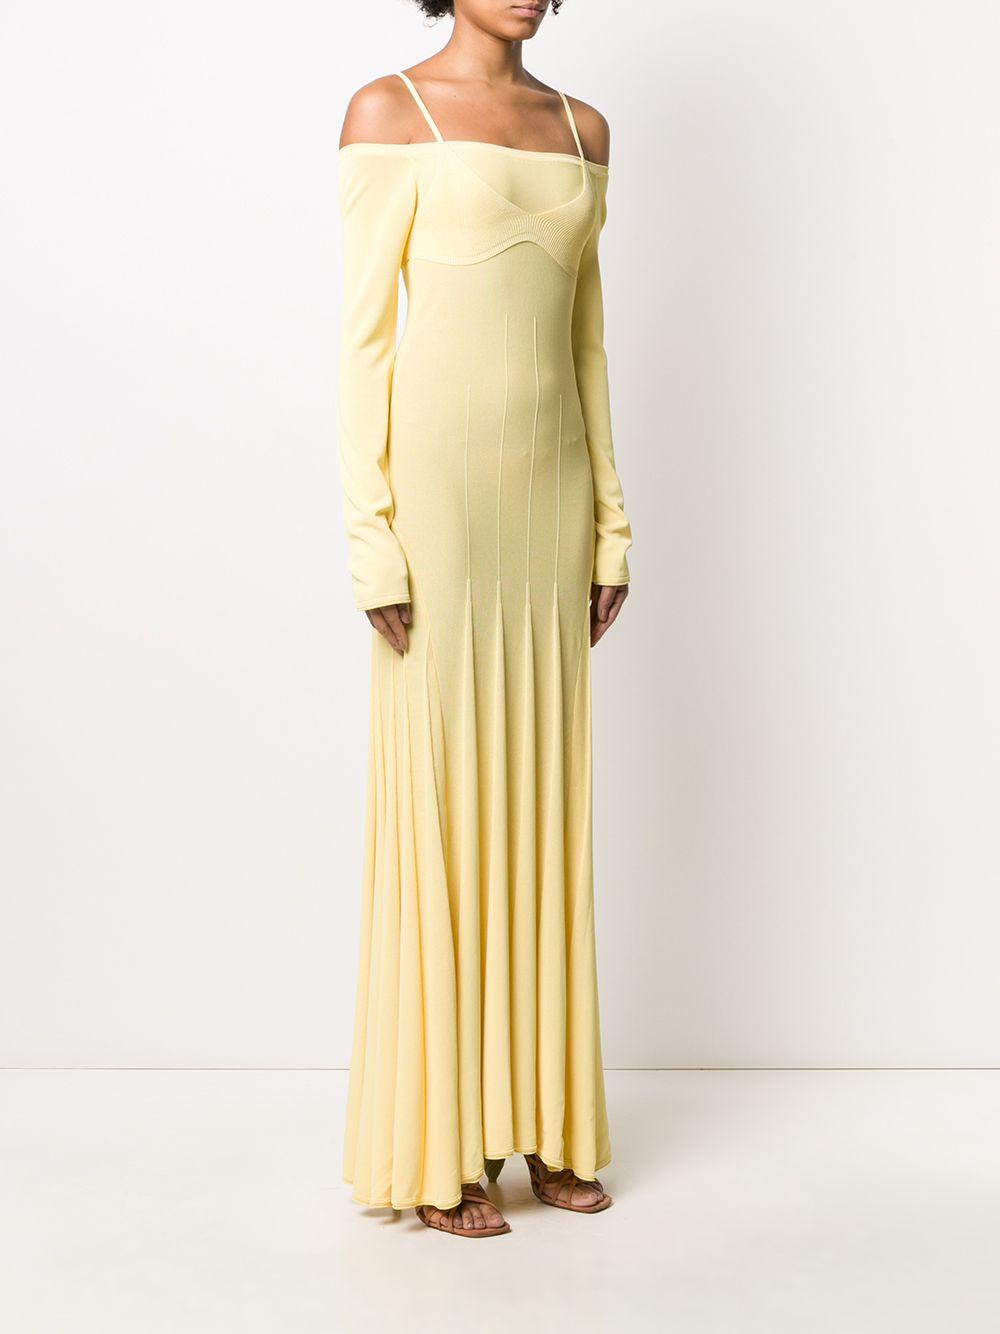 Jacquemus Synthetic La Robe Maille Valensole Dress in Yellow | Lyst